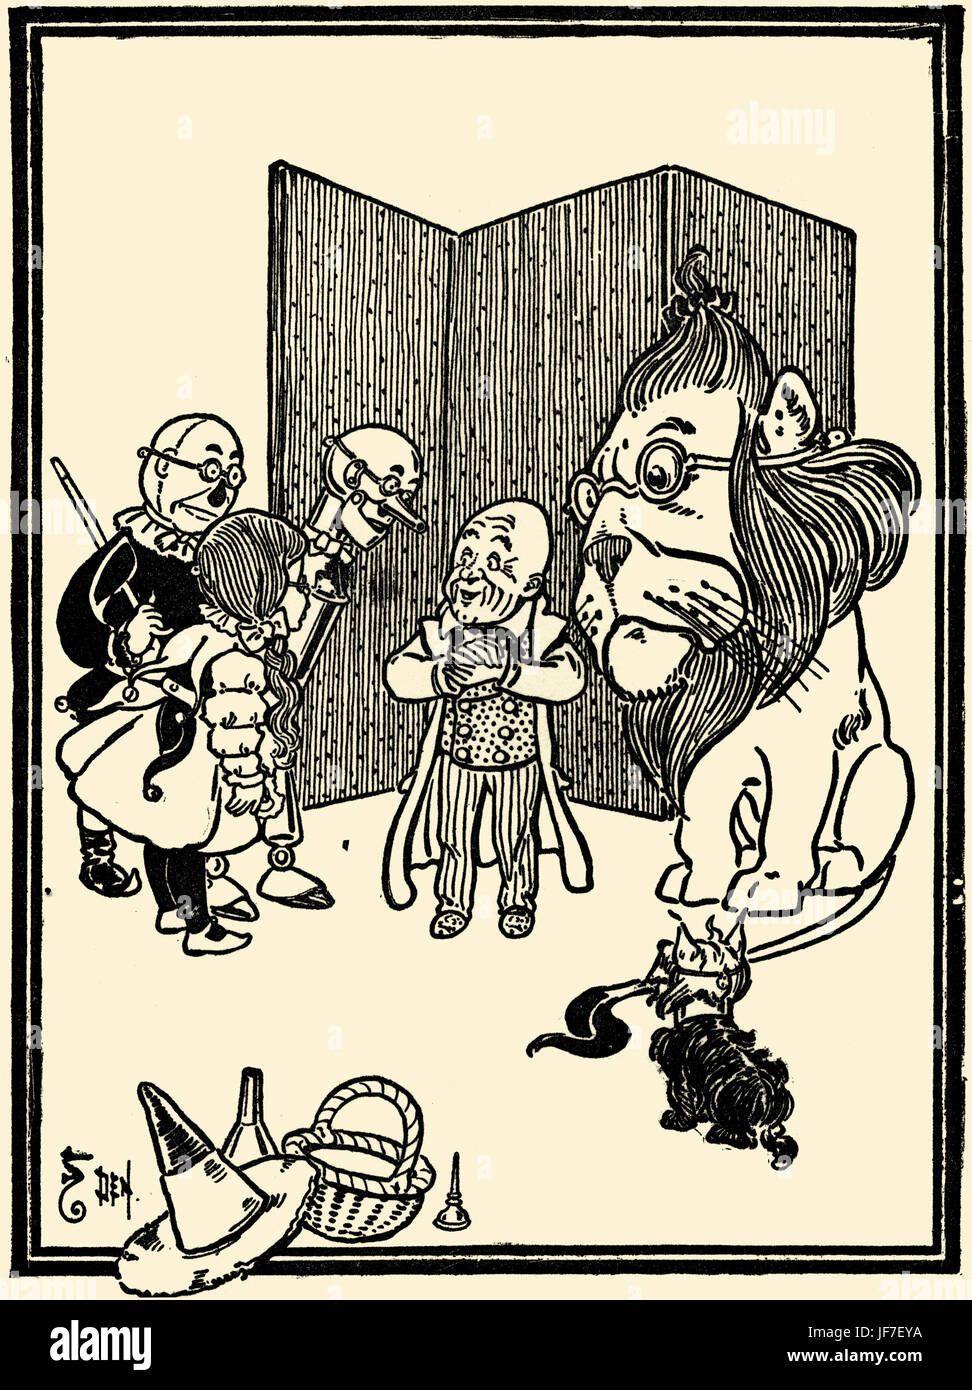 The Wizard of Oz by L. Frank Baum book . Illustration by W.W. Denslow. Caption: Exactly so! I am a humbug. (Great wizard).Published by Bobbs Merill. American author, 15 May 1856 – 6 May 1919 Stock Photo